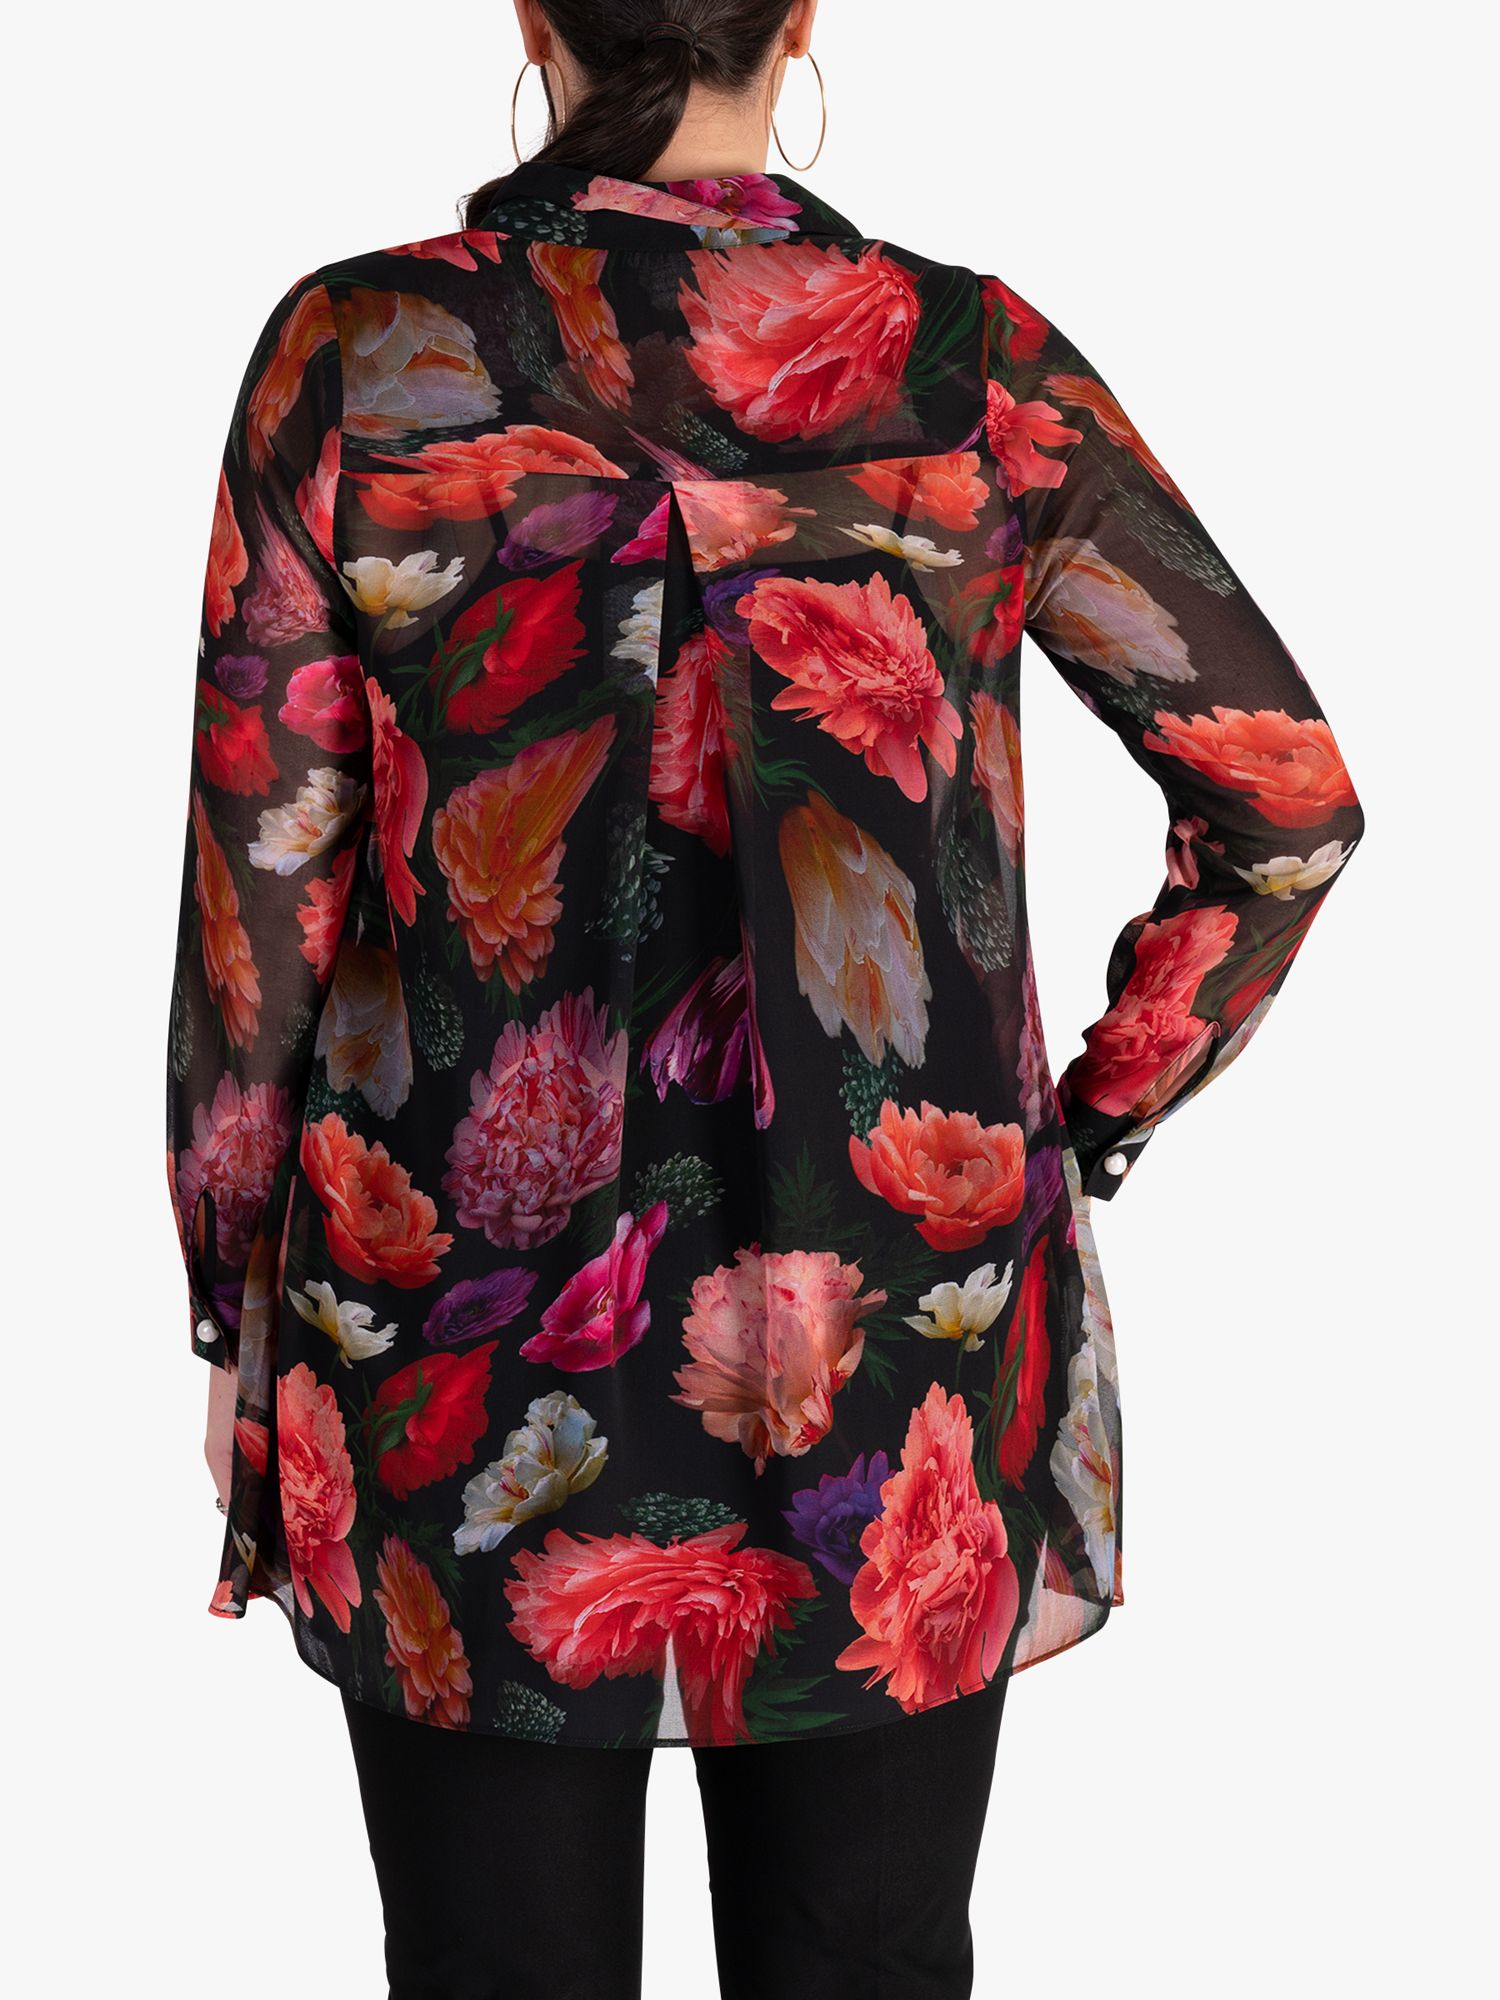 Buy chesa Rose Bouquet Print Blouse with Back Pleat Detail, Black/Multi Online at johnlewis.com